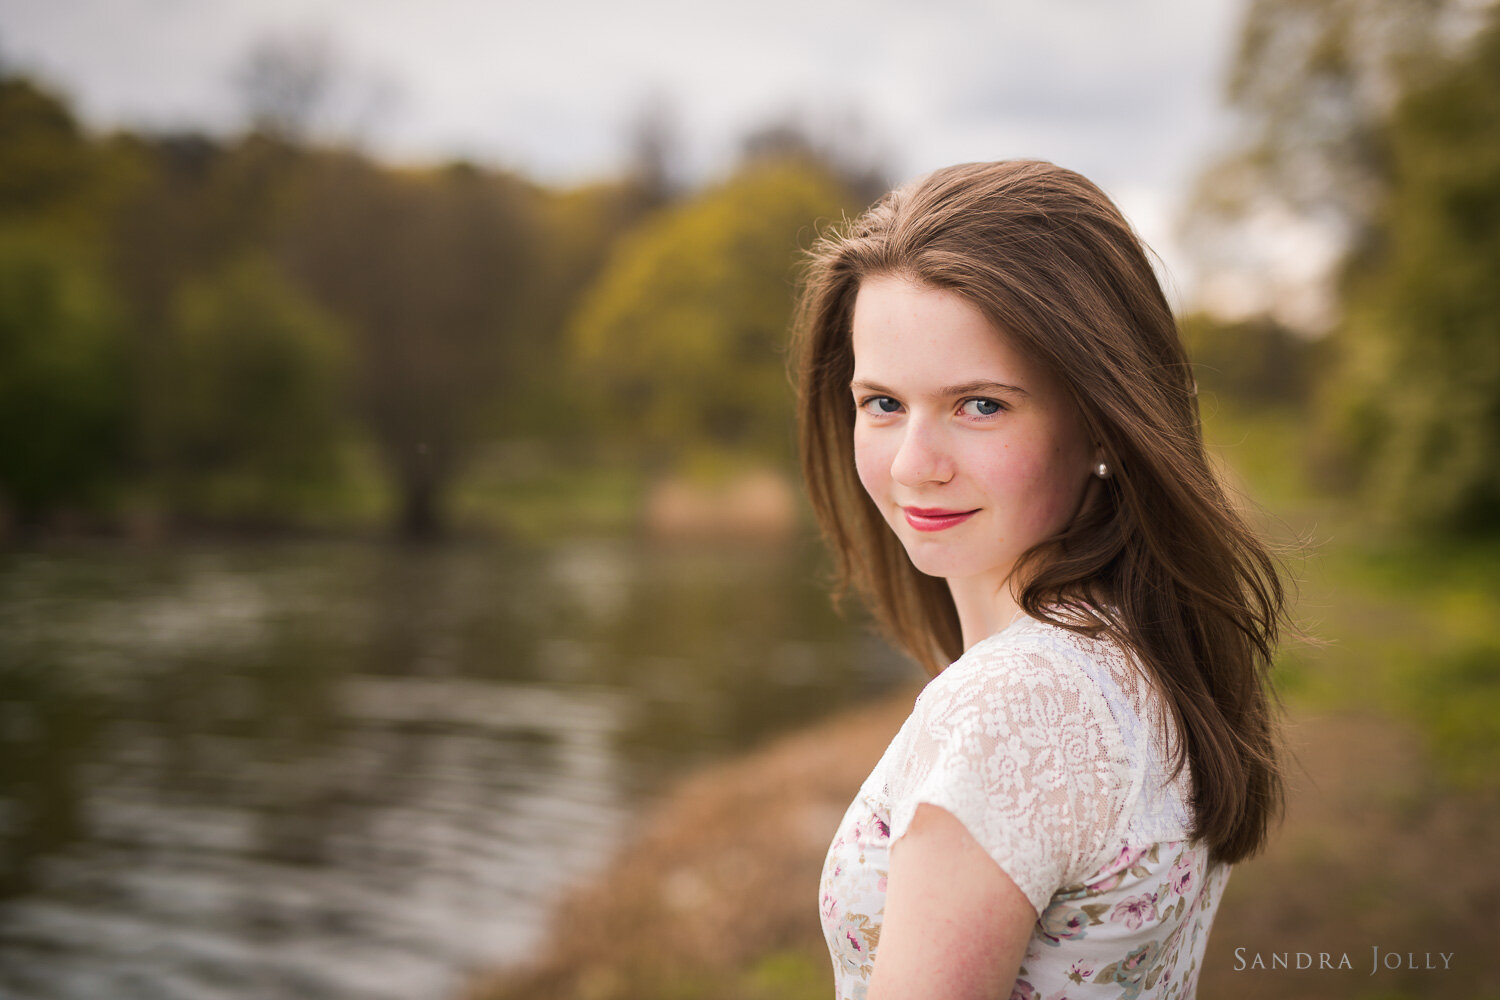 portrait-of-a-beautiful-teen-girl-in-stockholm-by-sandra-jolly-photography.jpg